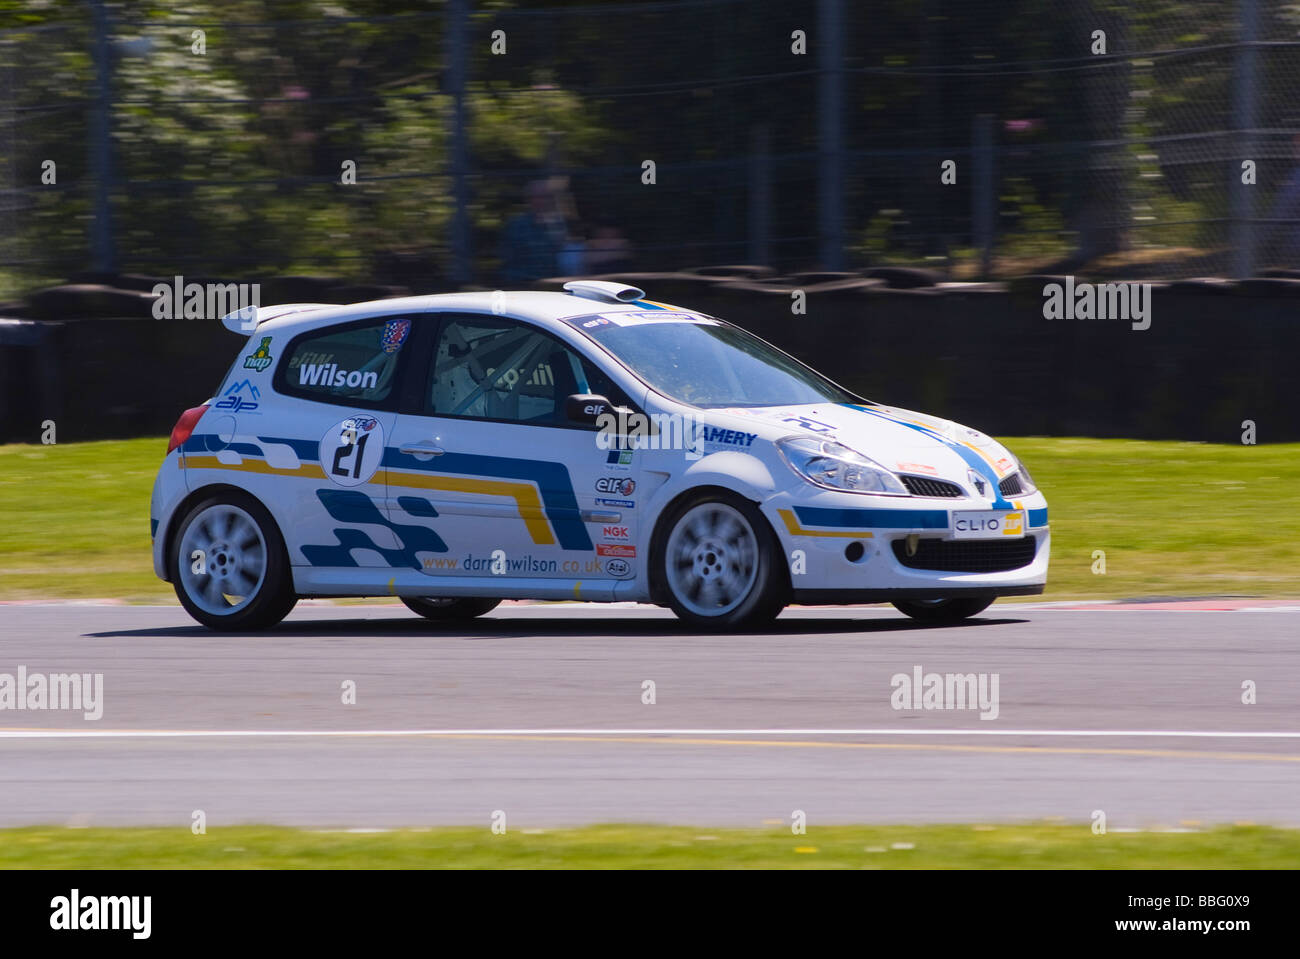 Renault Clio 4 RS on the race track Stock Photo - Alamy